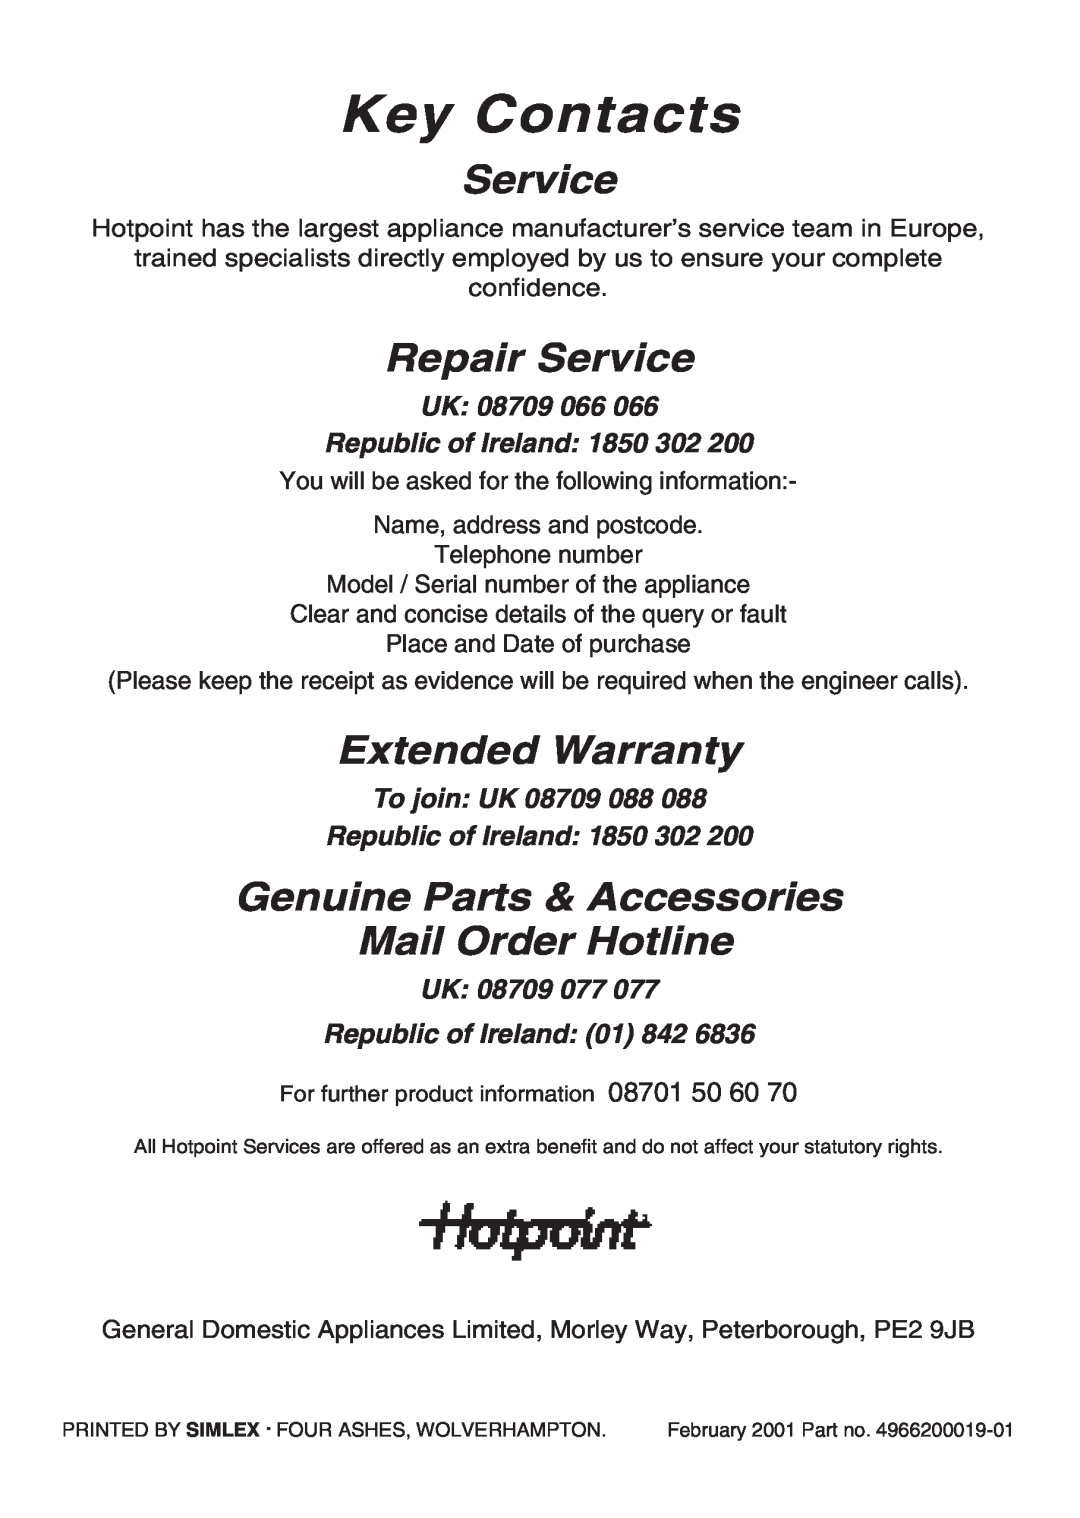 Hotpoint EG21 & EG22 Key Contacts, Repair Service, Extended Warranty, Genuine Parts & Accessories Mail Order Hotline 